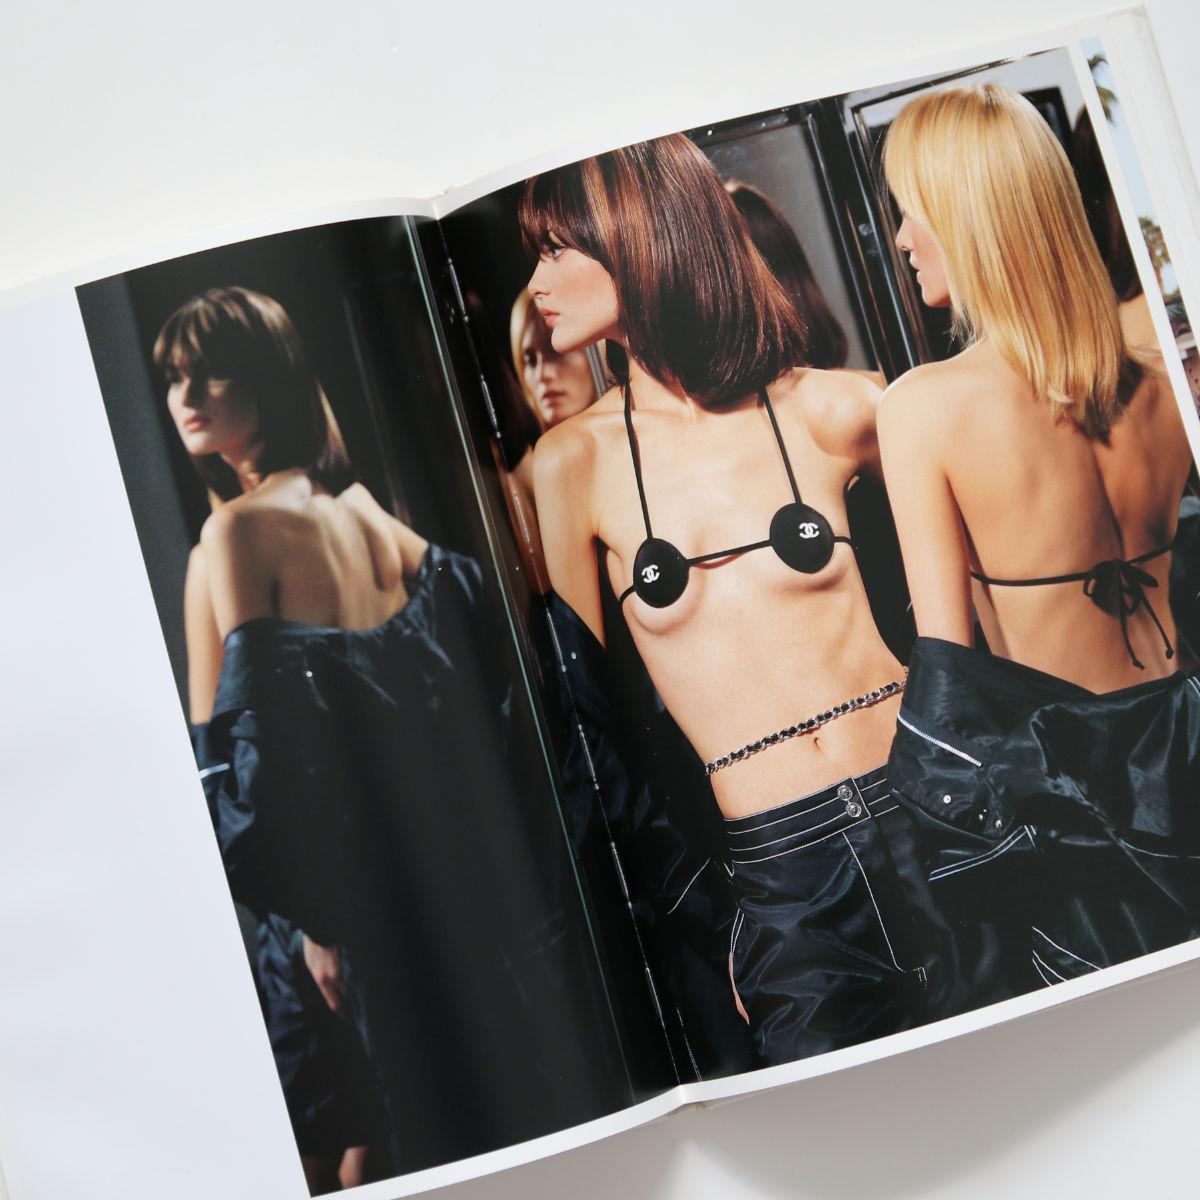 CHANEL

1996 - Spring Summer

With Amber Valletta. Hardcover. All photography by Karl Lagerfeld . 

Format: approx. 30 cm x 23.7 cm
A must-have for any collection - but also perfect as a couch-table book or picture motifs to frame.

Buy Now Or Cry